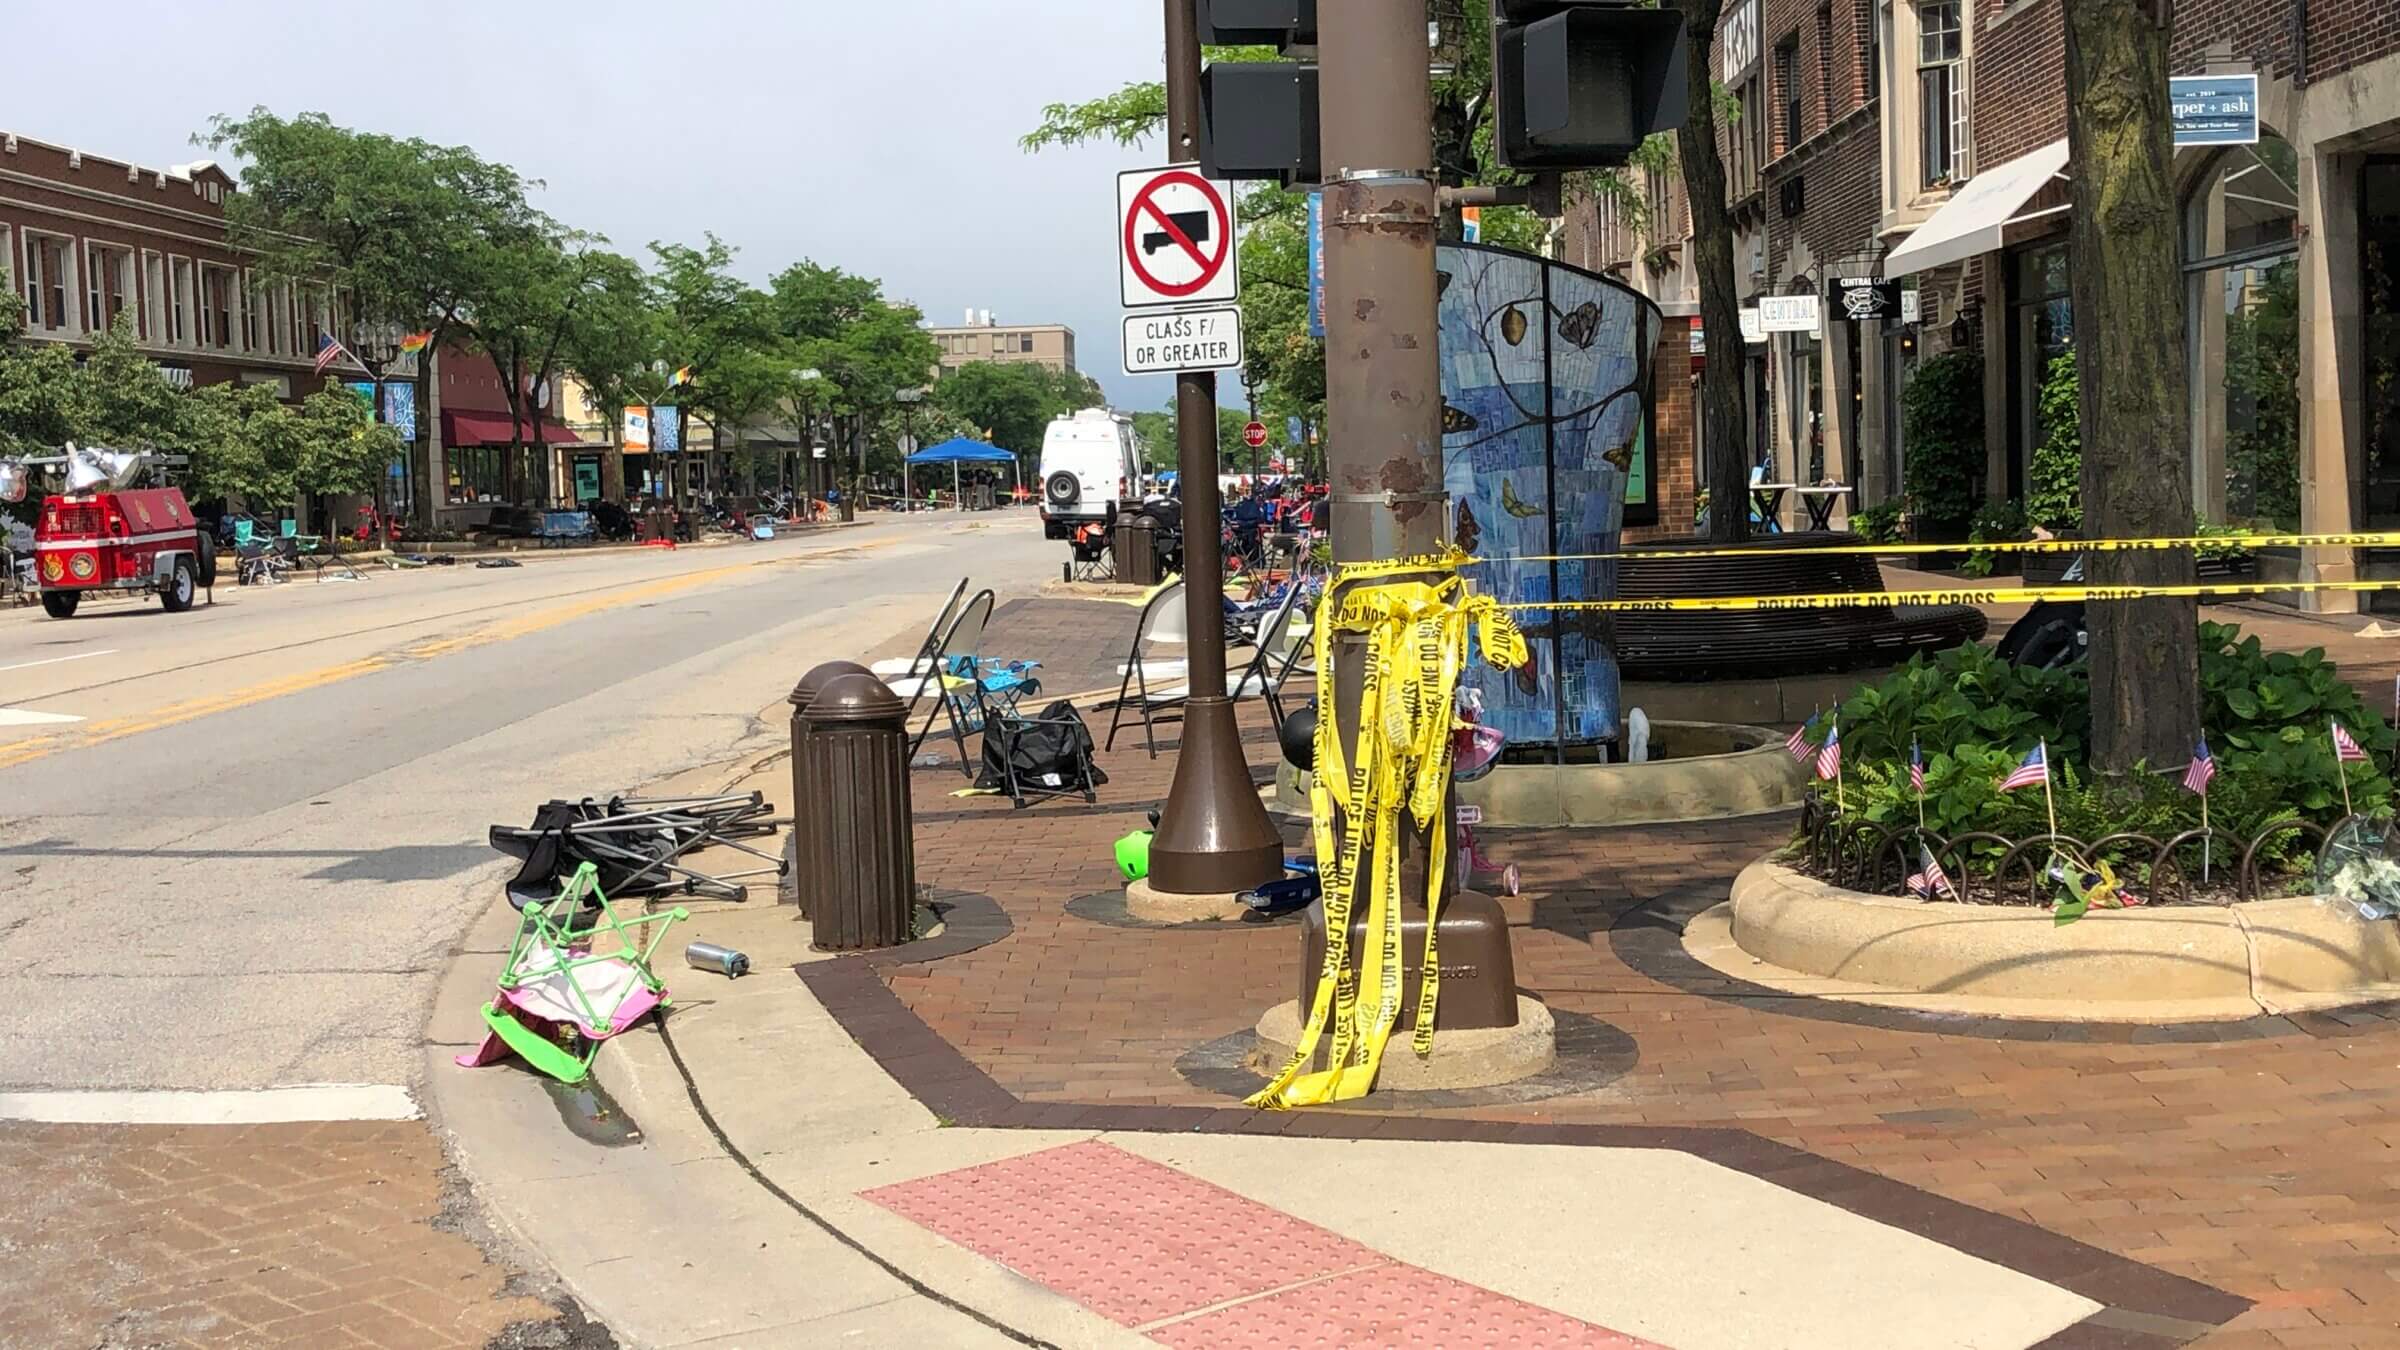 A section of Highland Park's Central Avenue remains cordoned off with lawn chairs left by parade attendees days after the deadly shooting there on July 4.